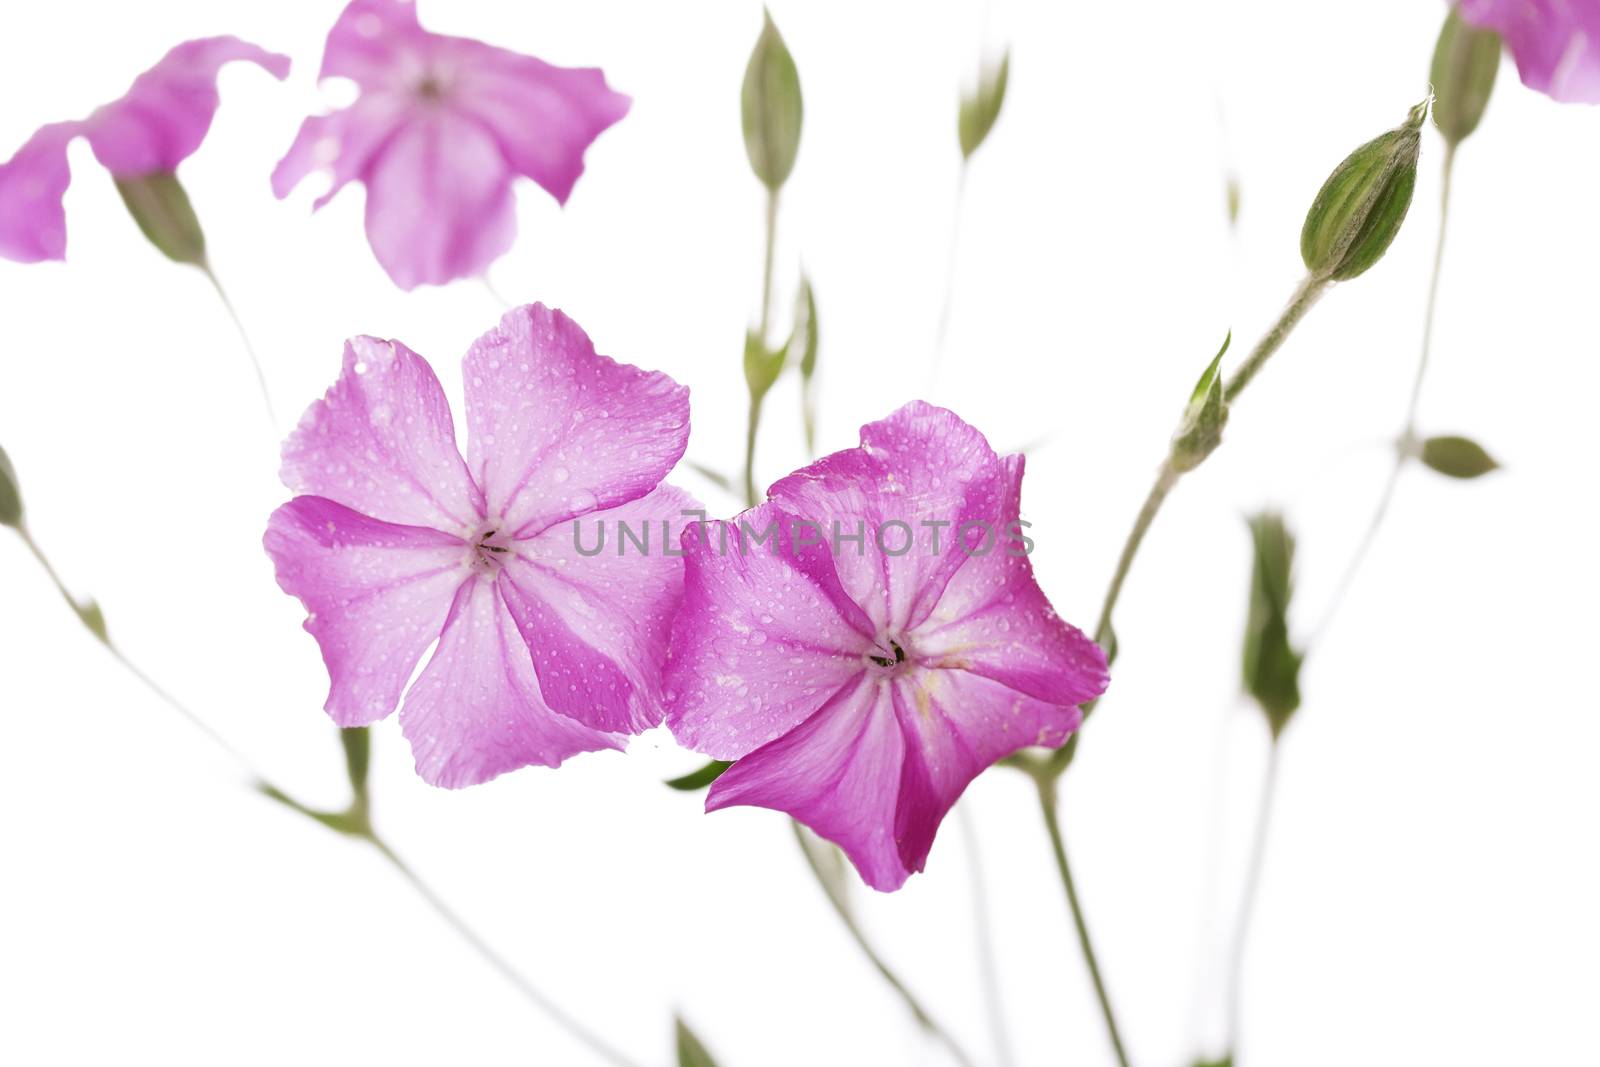 Dew drops on pink wild flowers isolated on white background by Irina1977